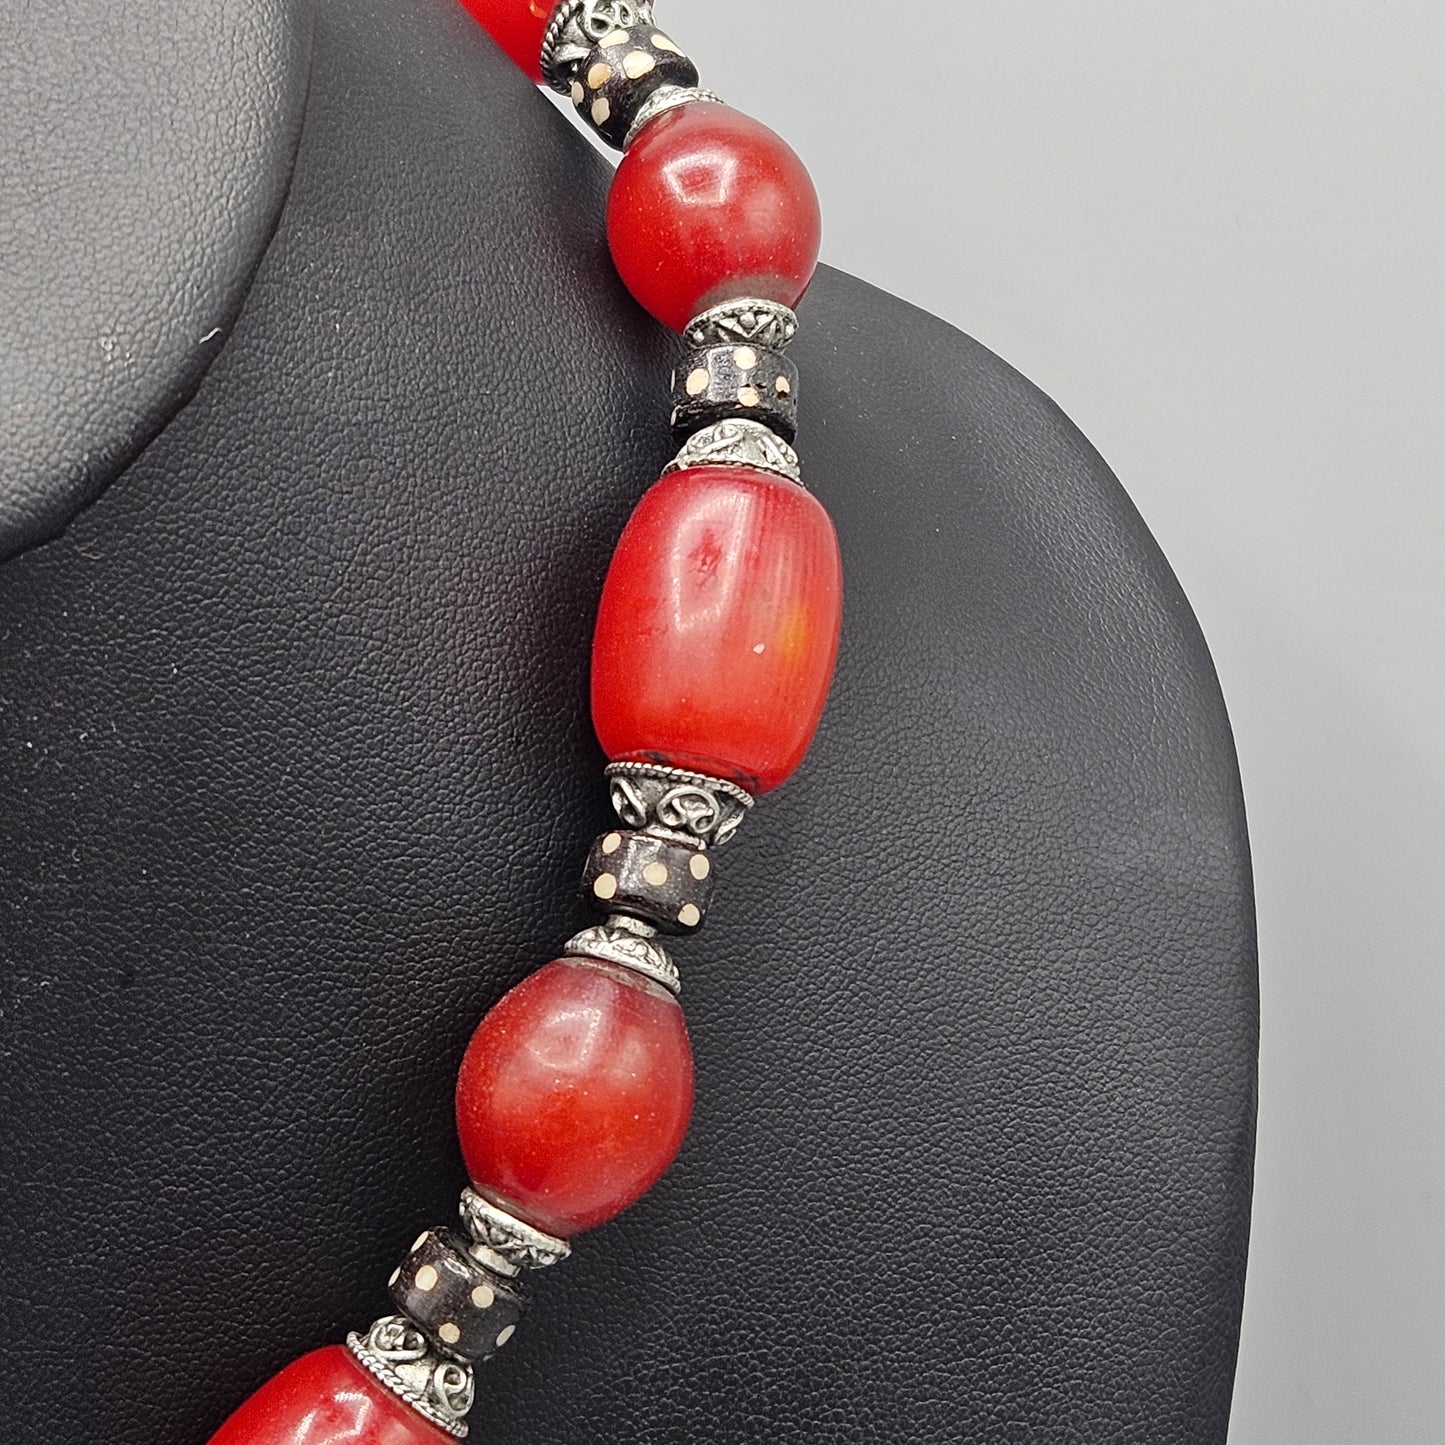 Vintage Red & Silver Necklace with Sterling Pendant